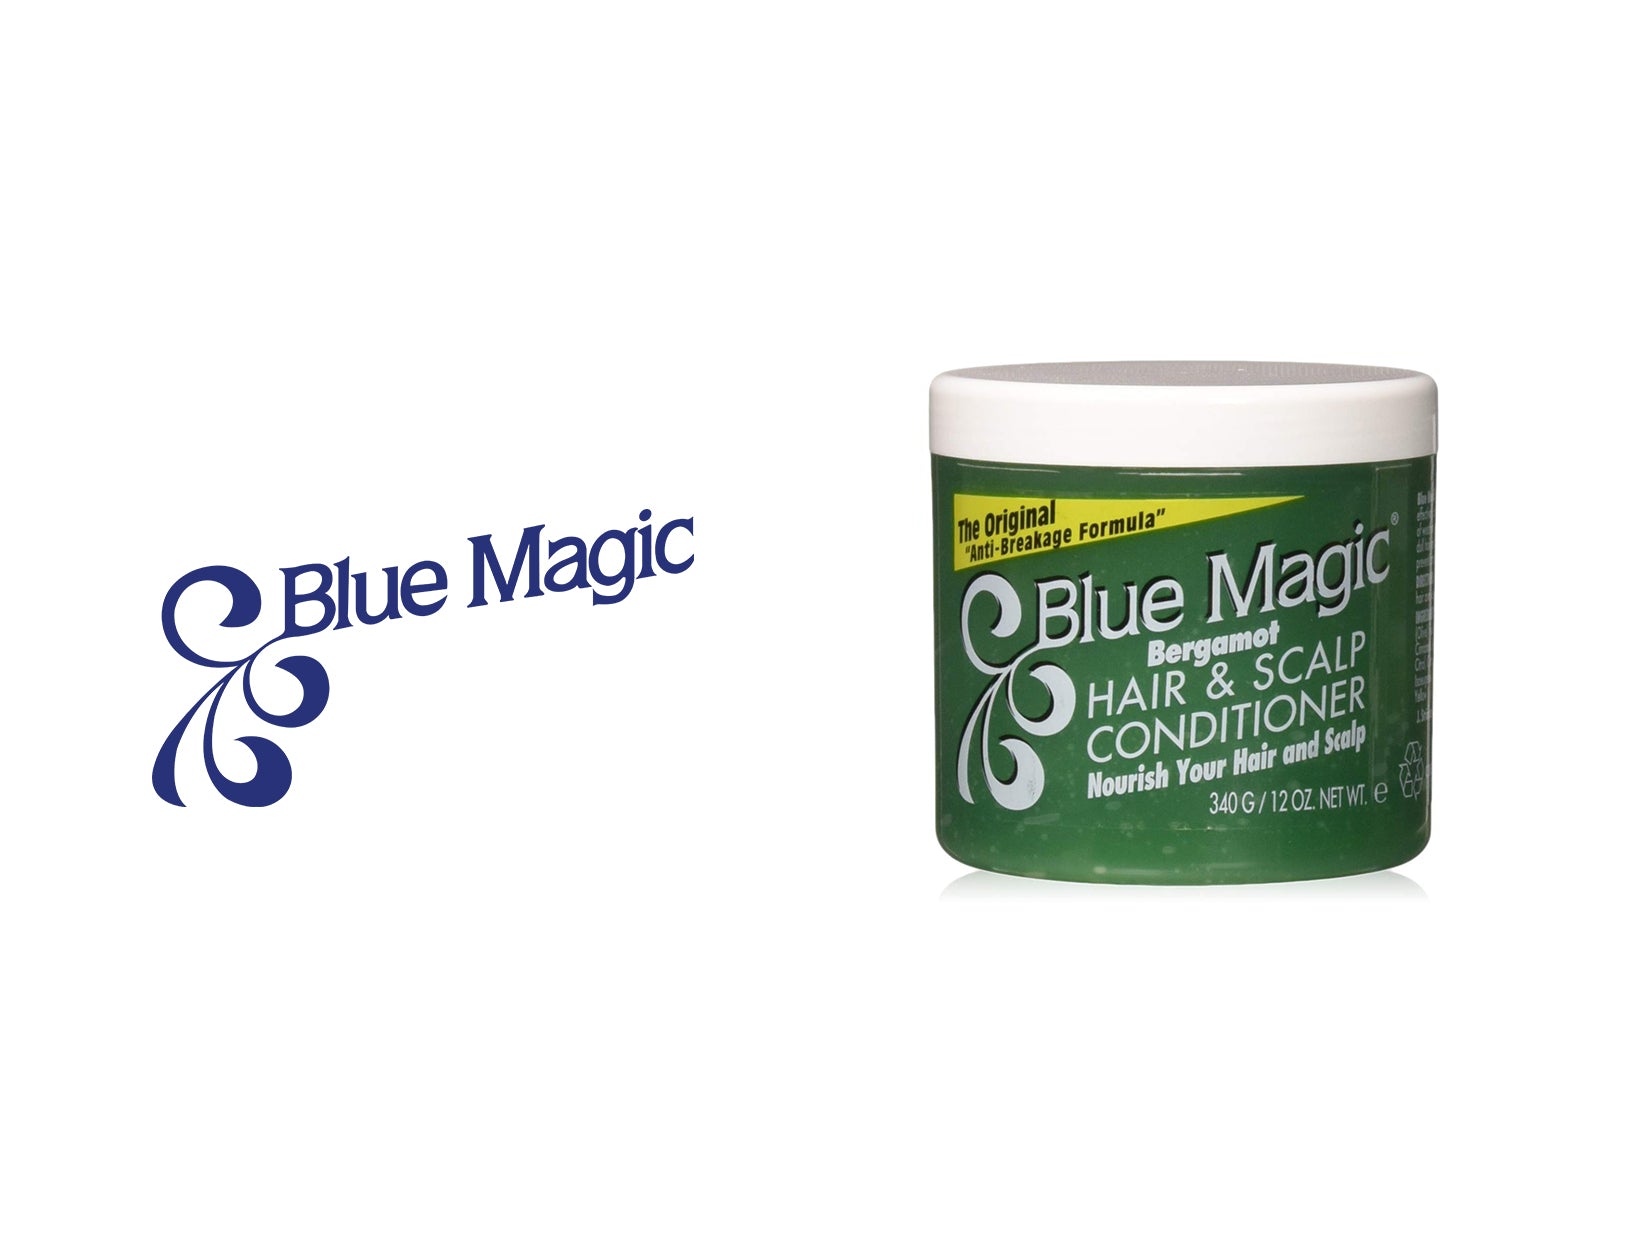 Blue Magic Hair Conditioner: Is It Good or Bad for Your Hair? - wide 4